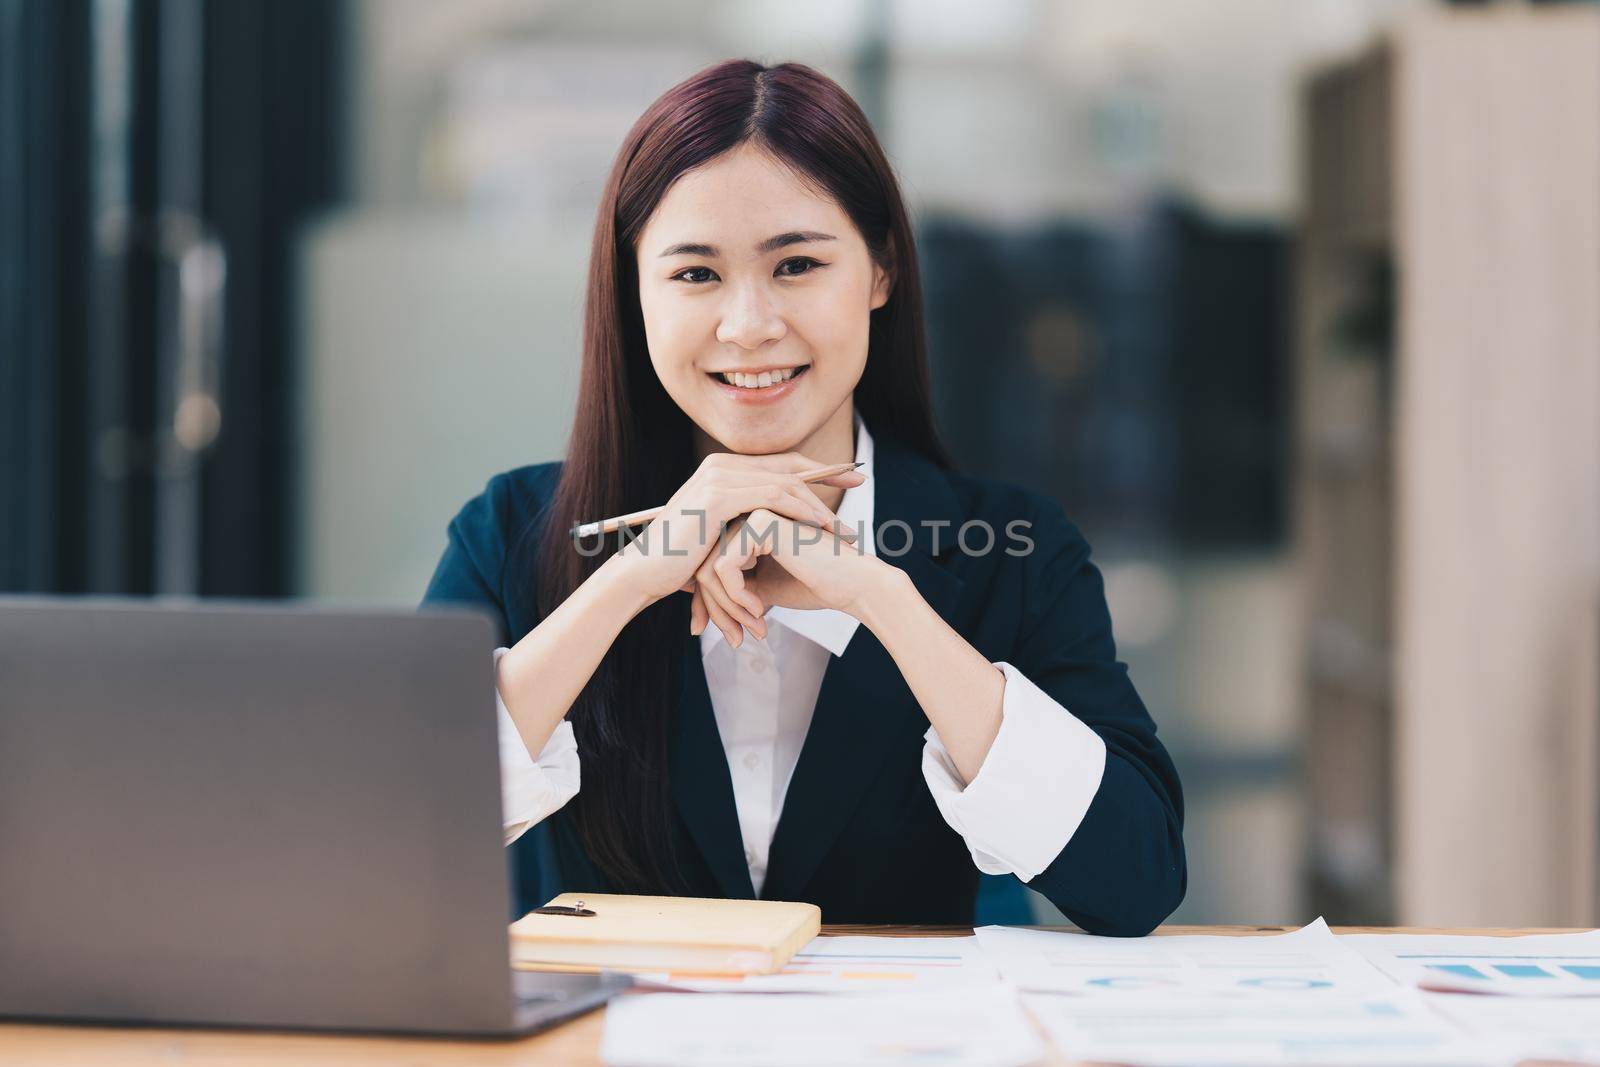 Business Finance audit tax Concept. Portrait of Asian happy Businesswoman smiling and working at office